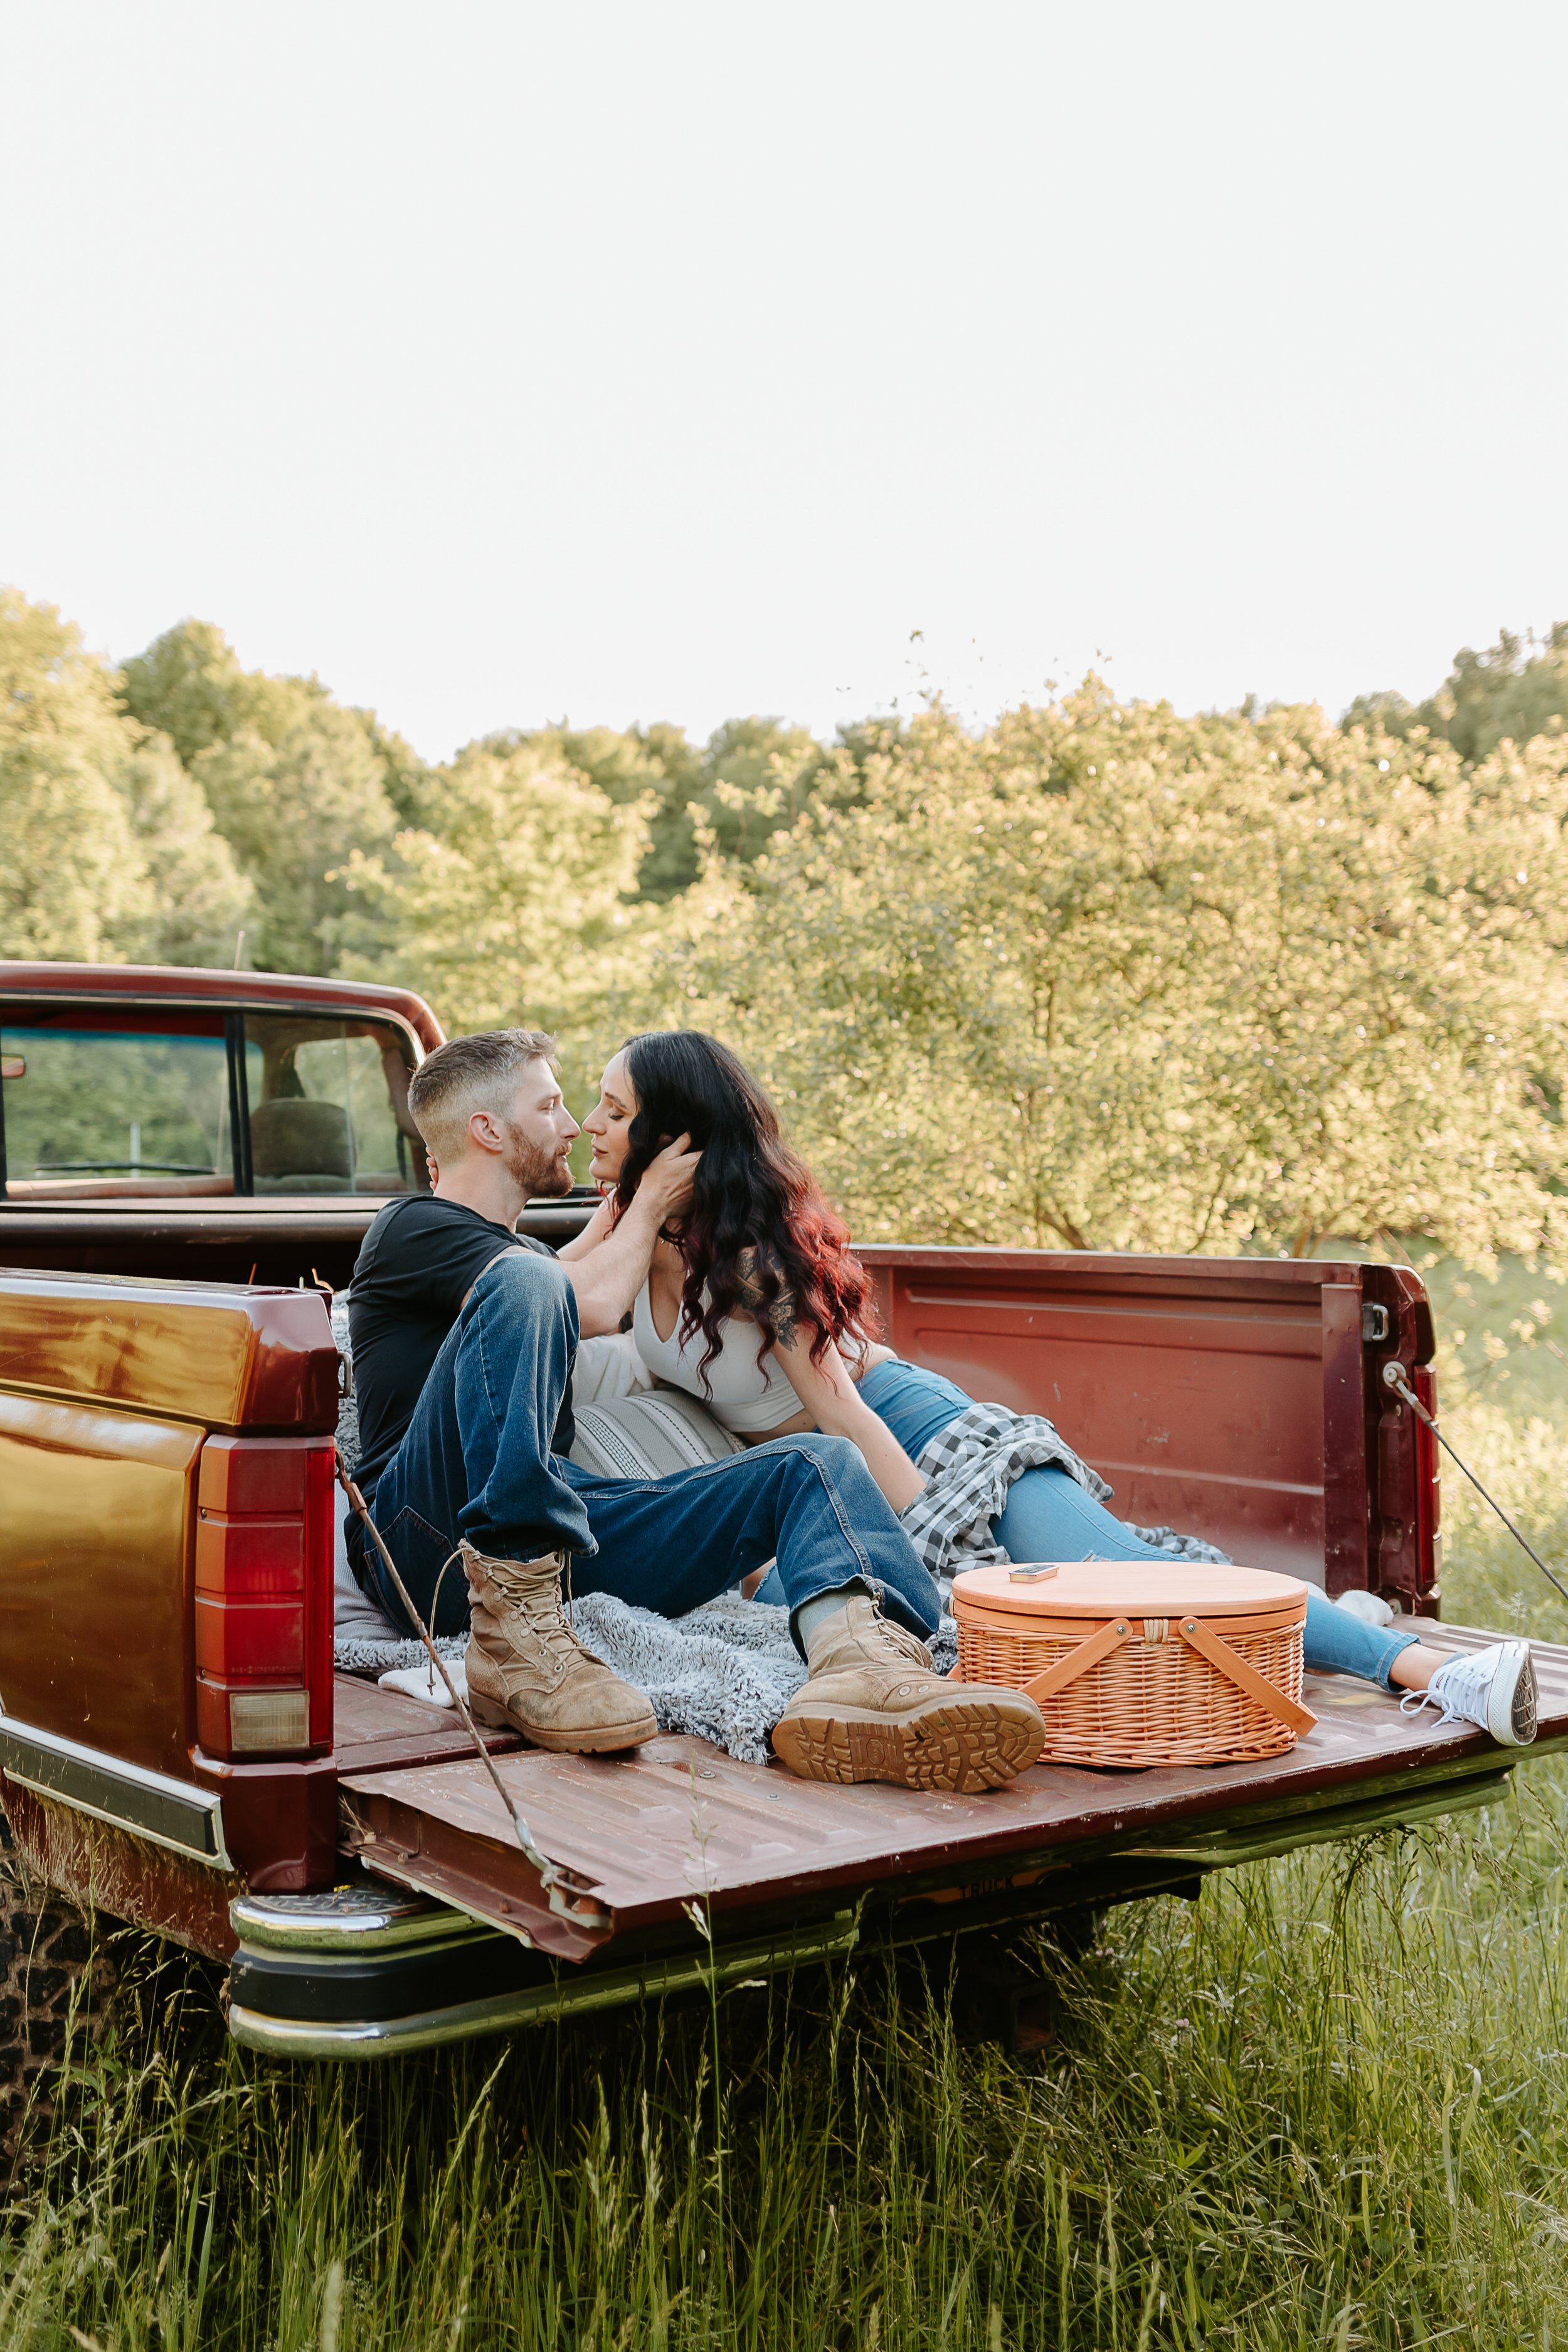 Woman leans into man to kiss while sitting in bed of red truck.